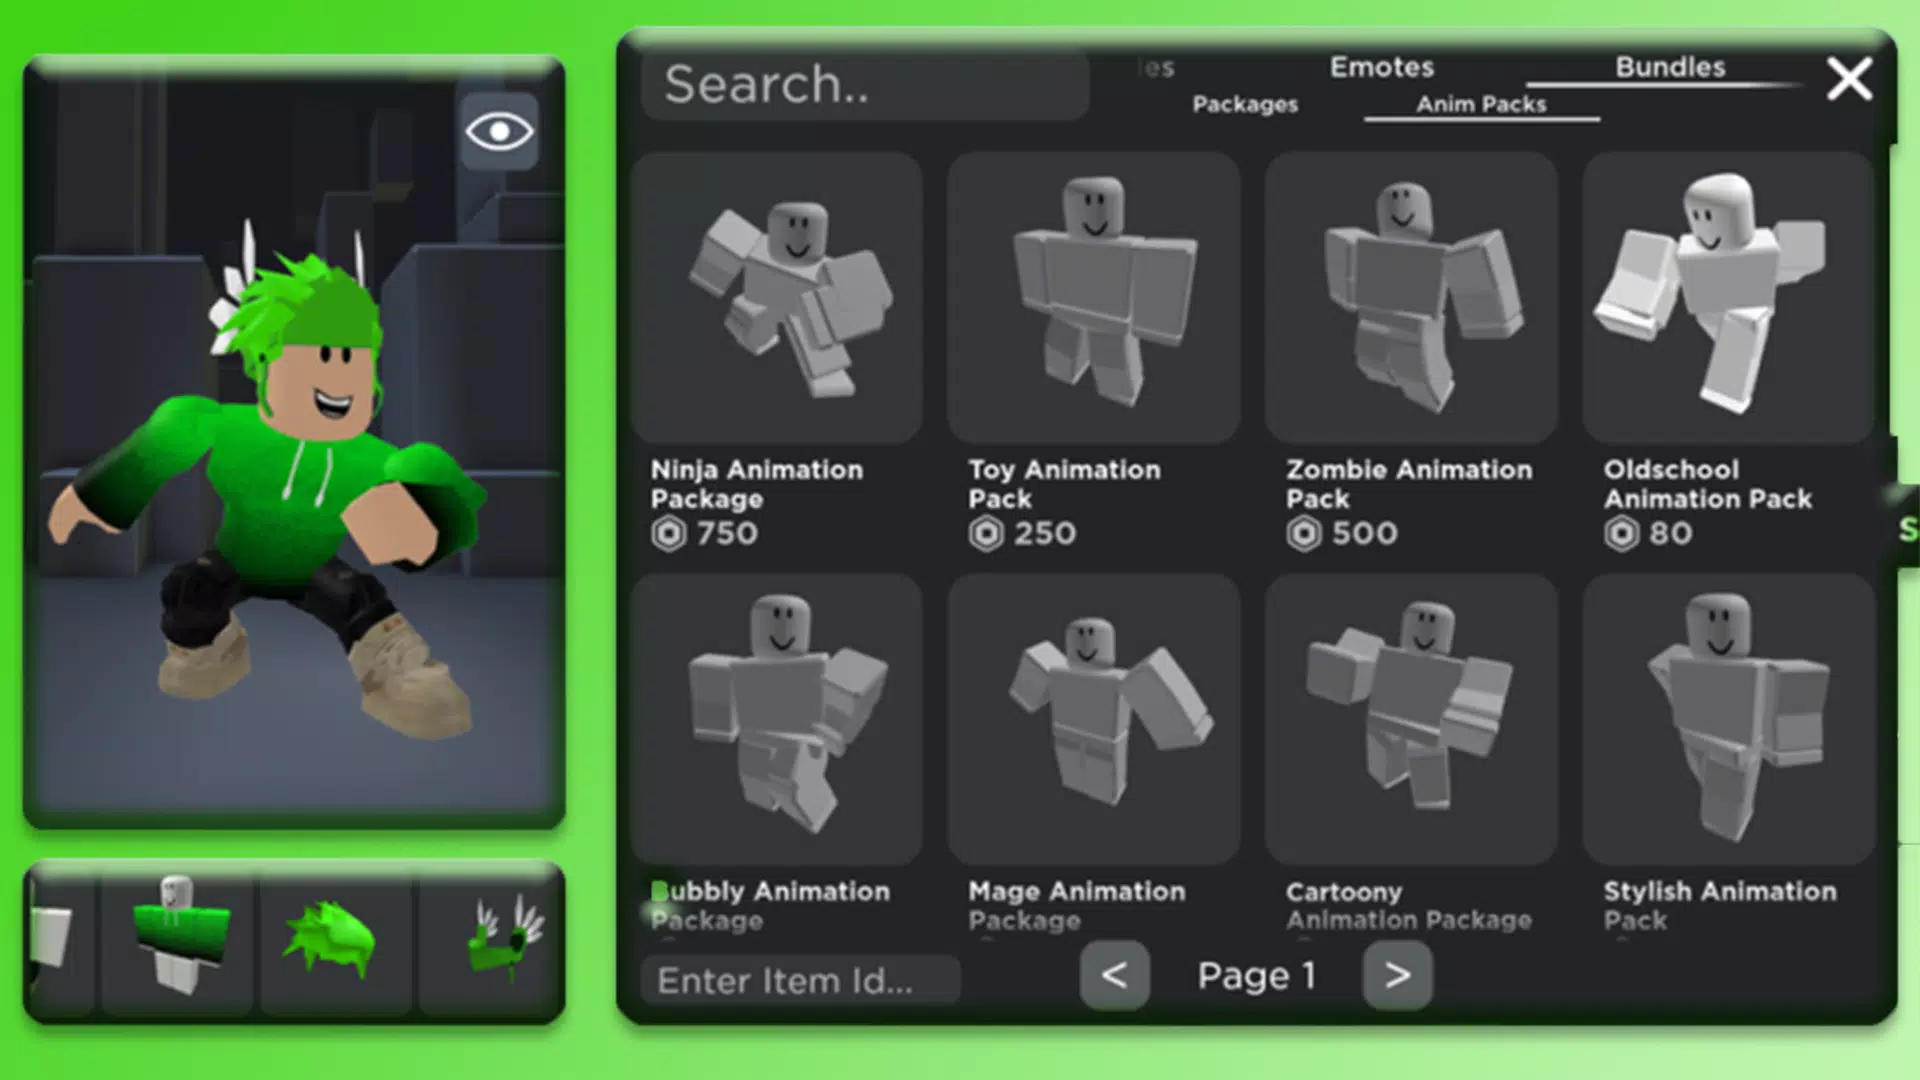 Roblox Catalog Avatar Creator Game Full Guide! (The Free Outfit